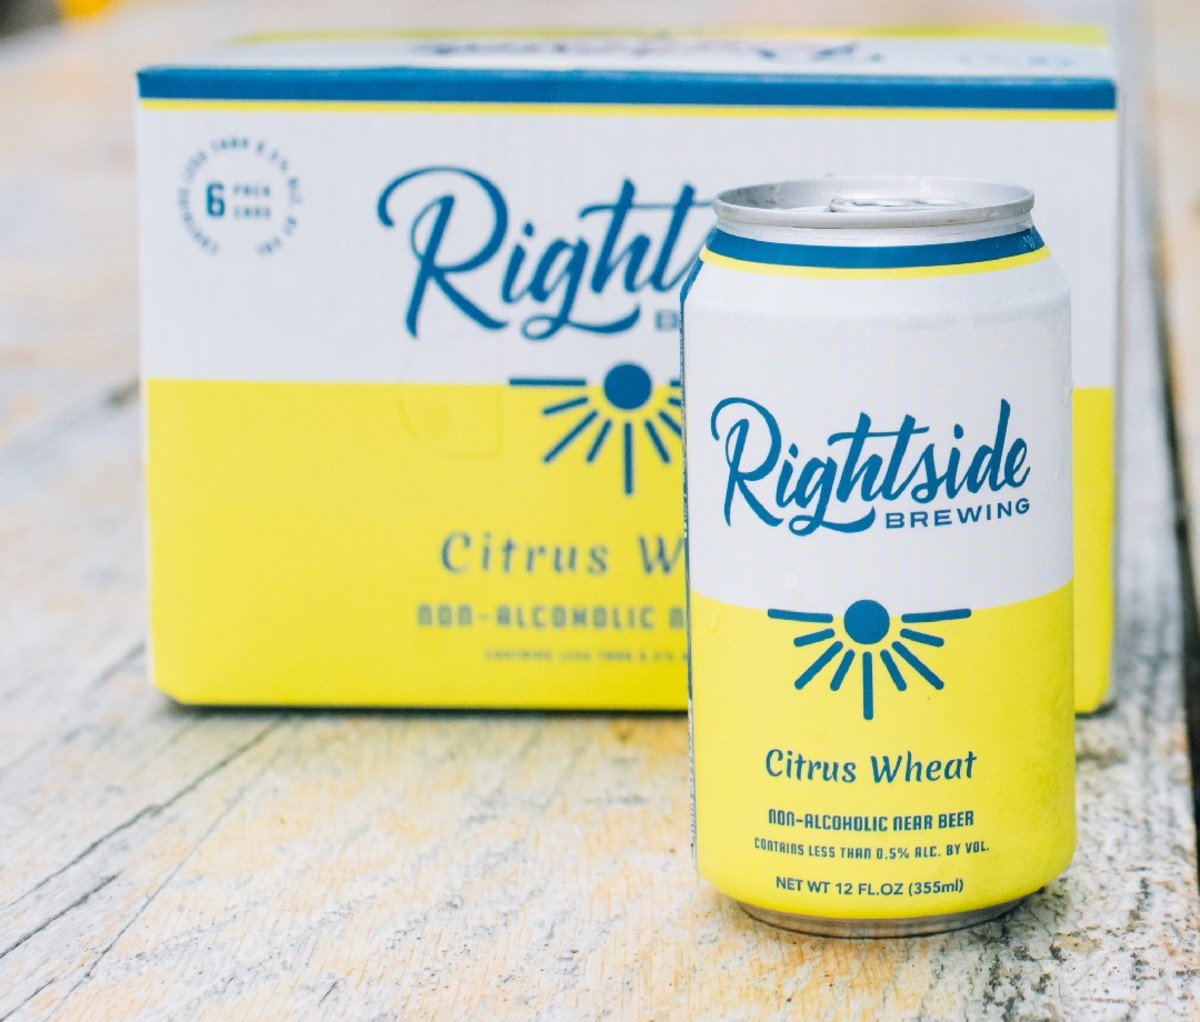 Can and case of Rightside Brewing Citrus Wheat nonalcoholic beer